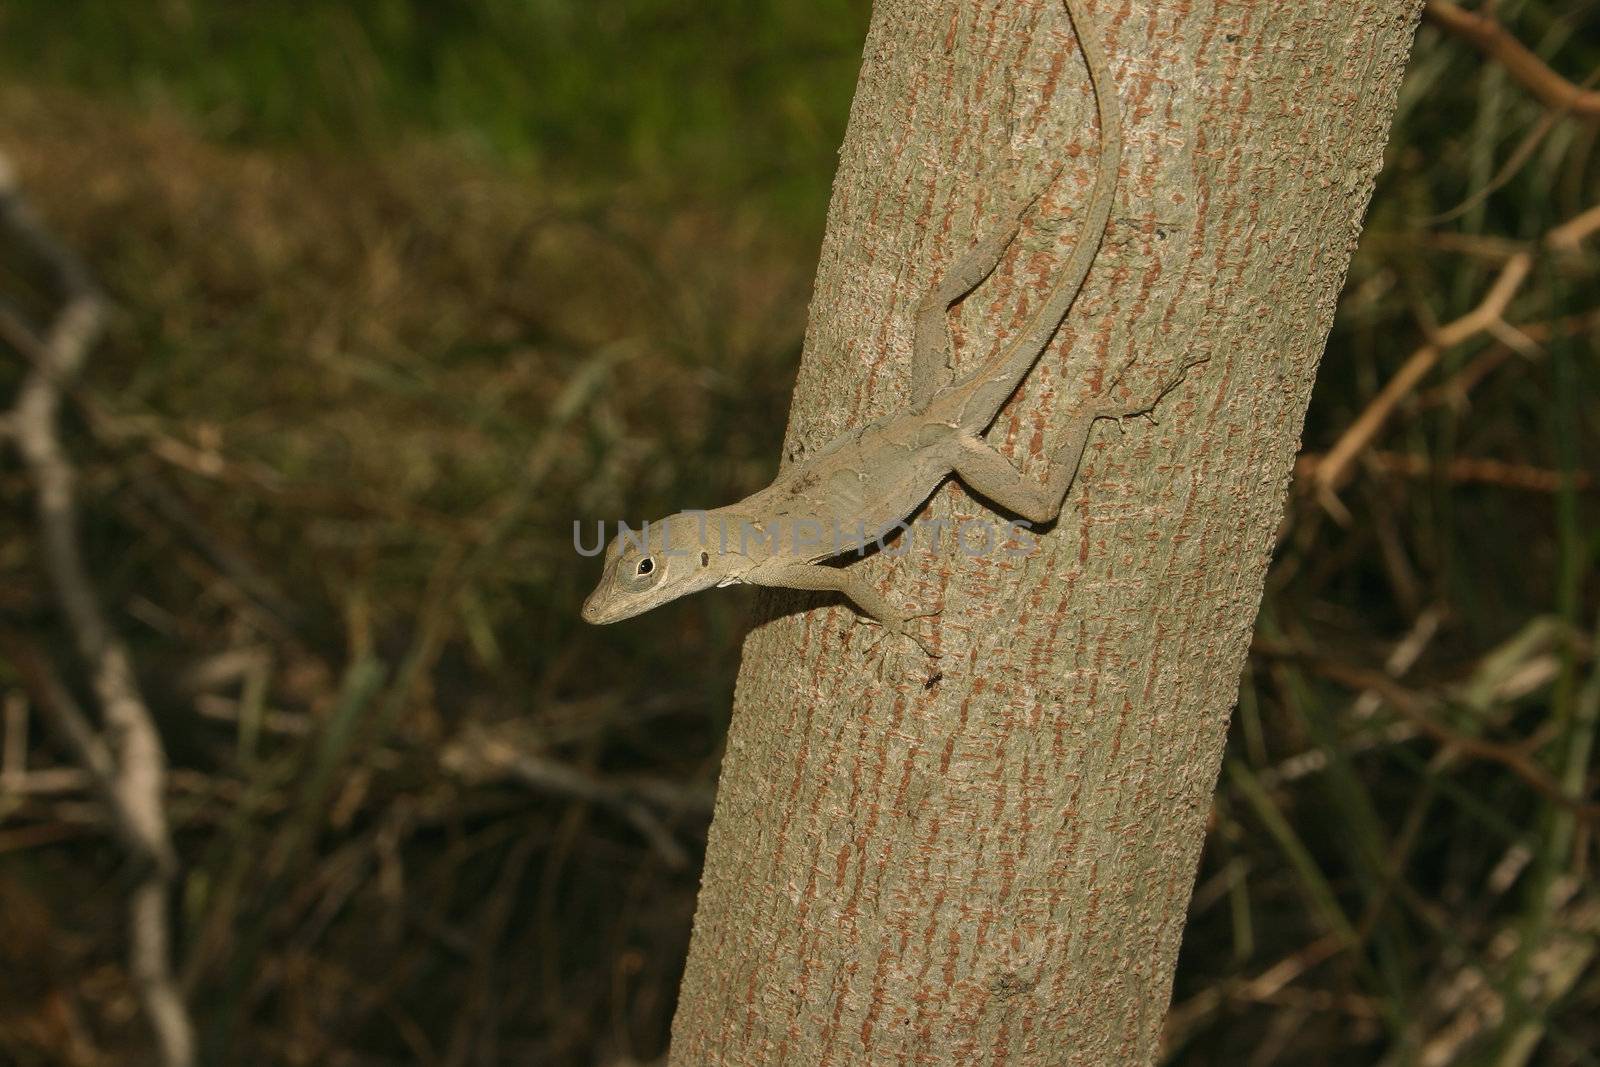 Anolis by tdietrich